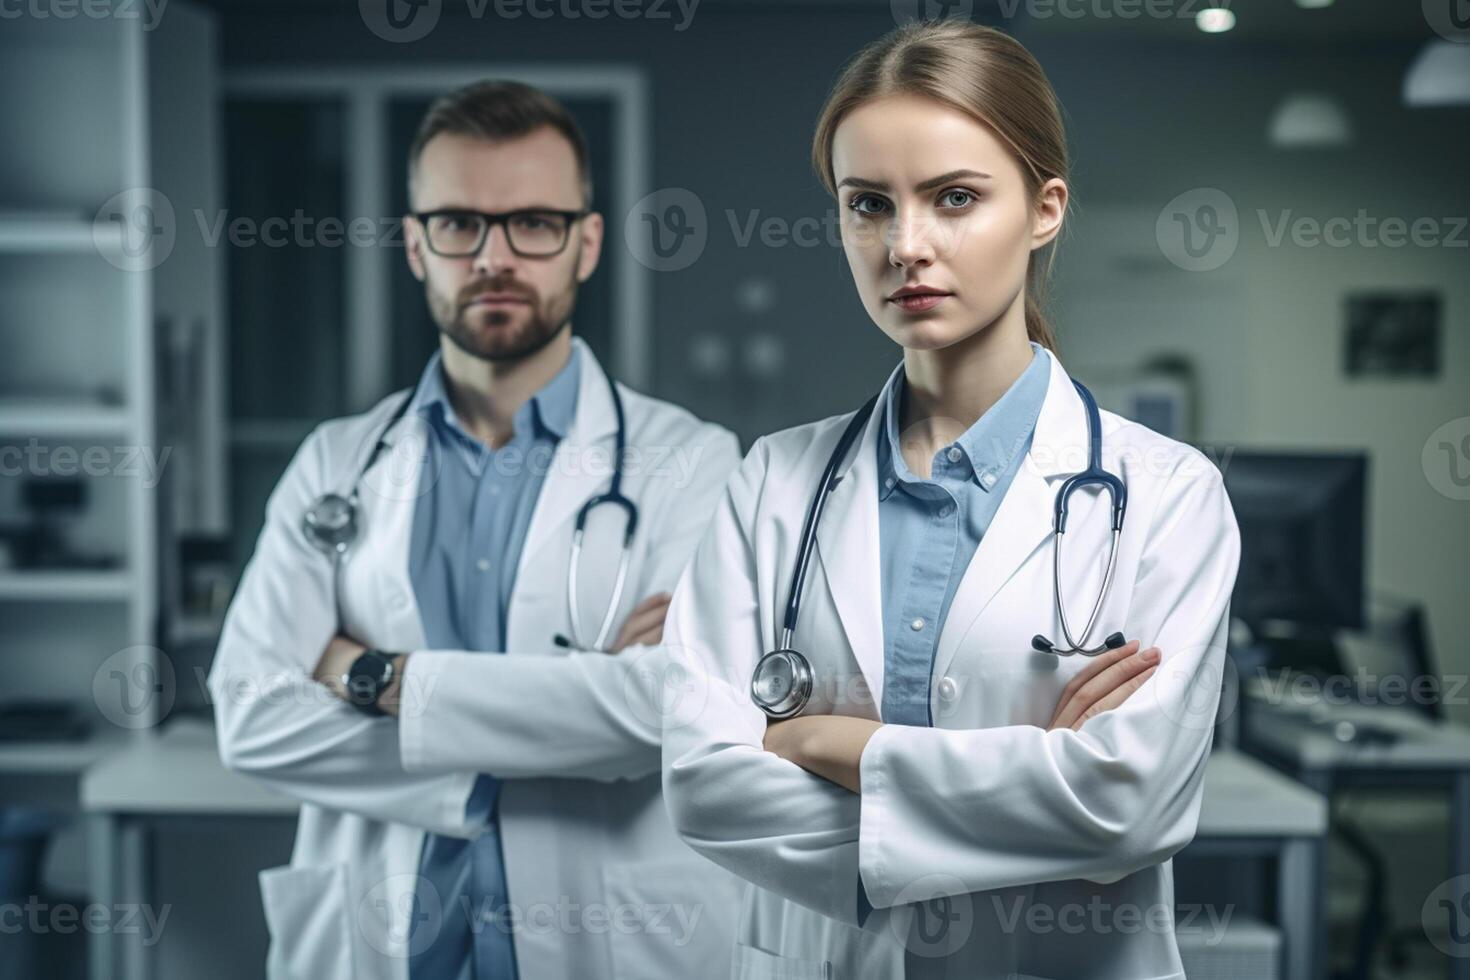 Portrait of confident doctors standing with crossed arms in modern hospital corridor photo